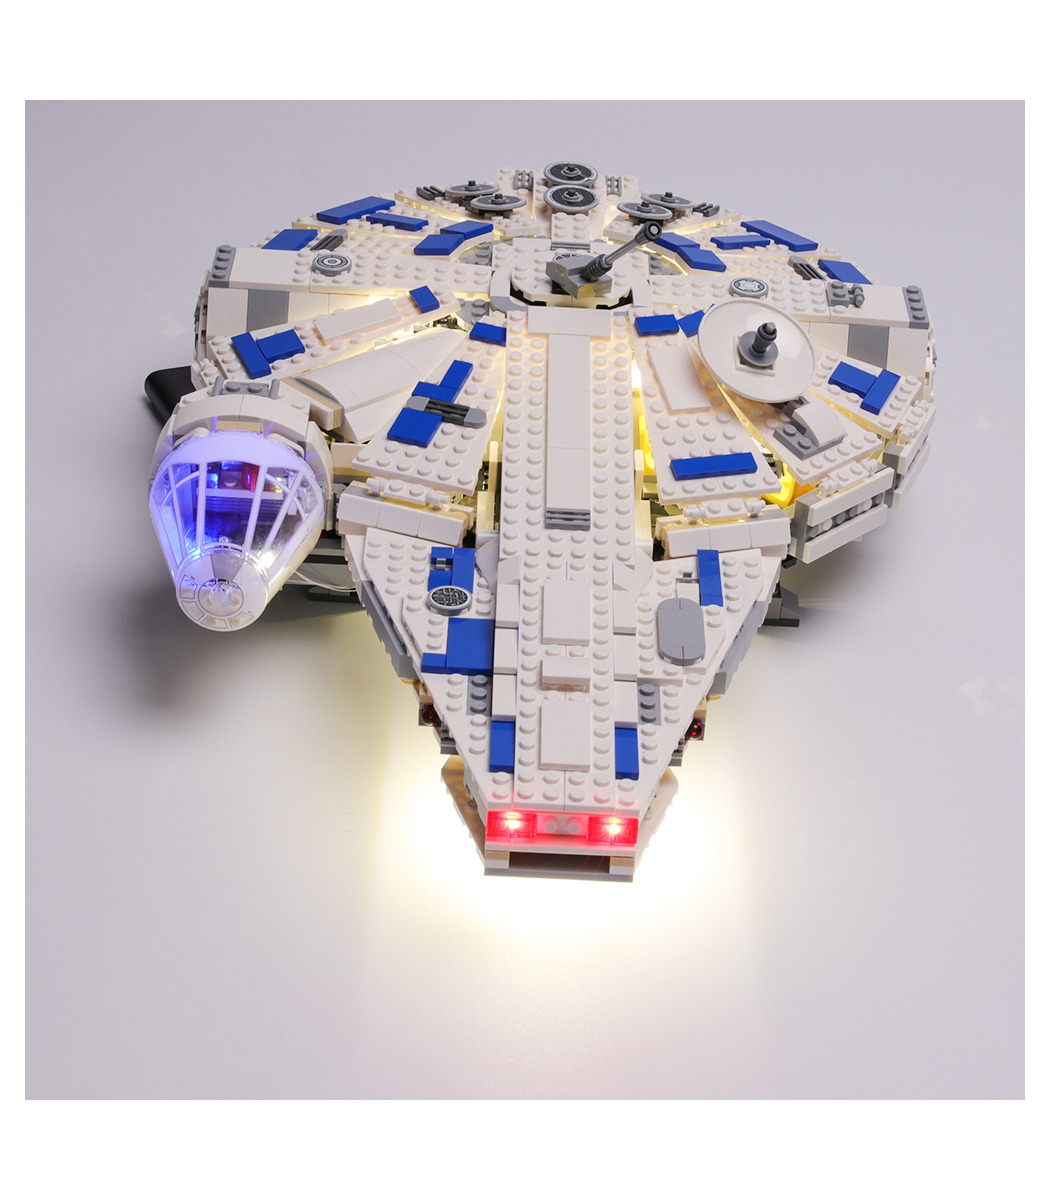 LEGO Star Wars Solo: A Star Wars Story Kessel Run Millennium Falcon 75212  Building Kit and Starship Model Set, Popular Building Toy and Gift for Kids